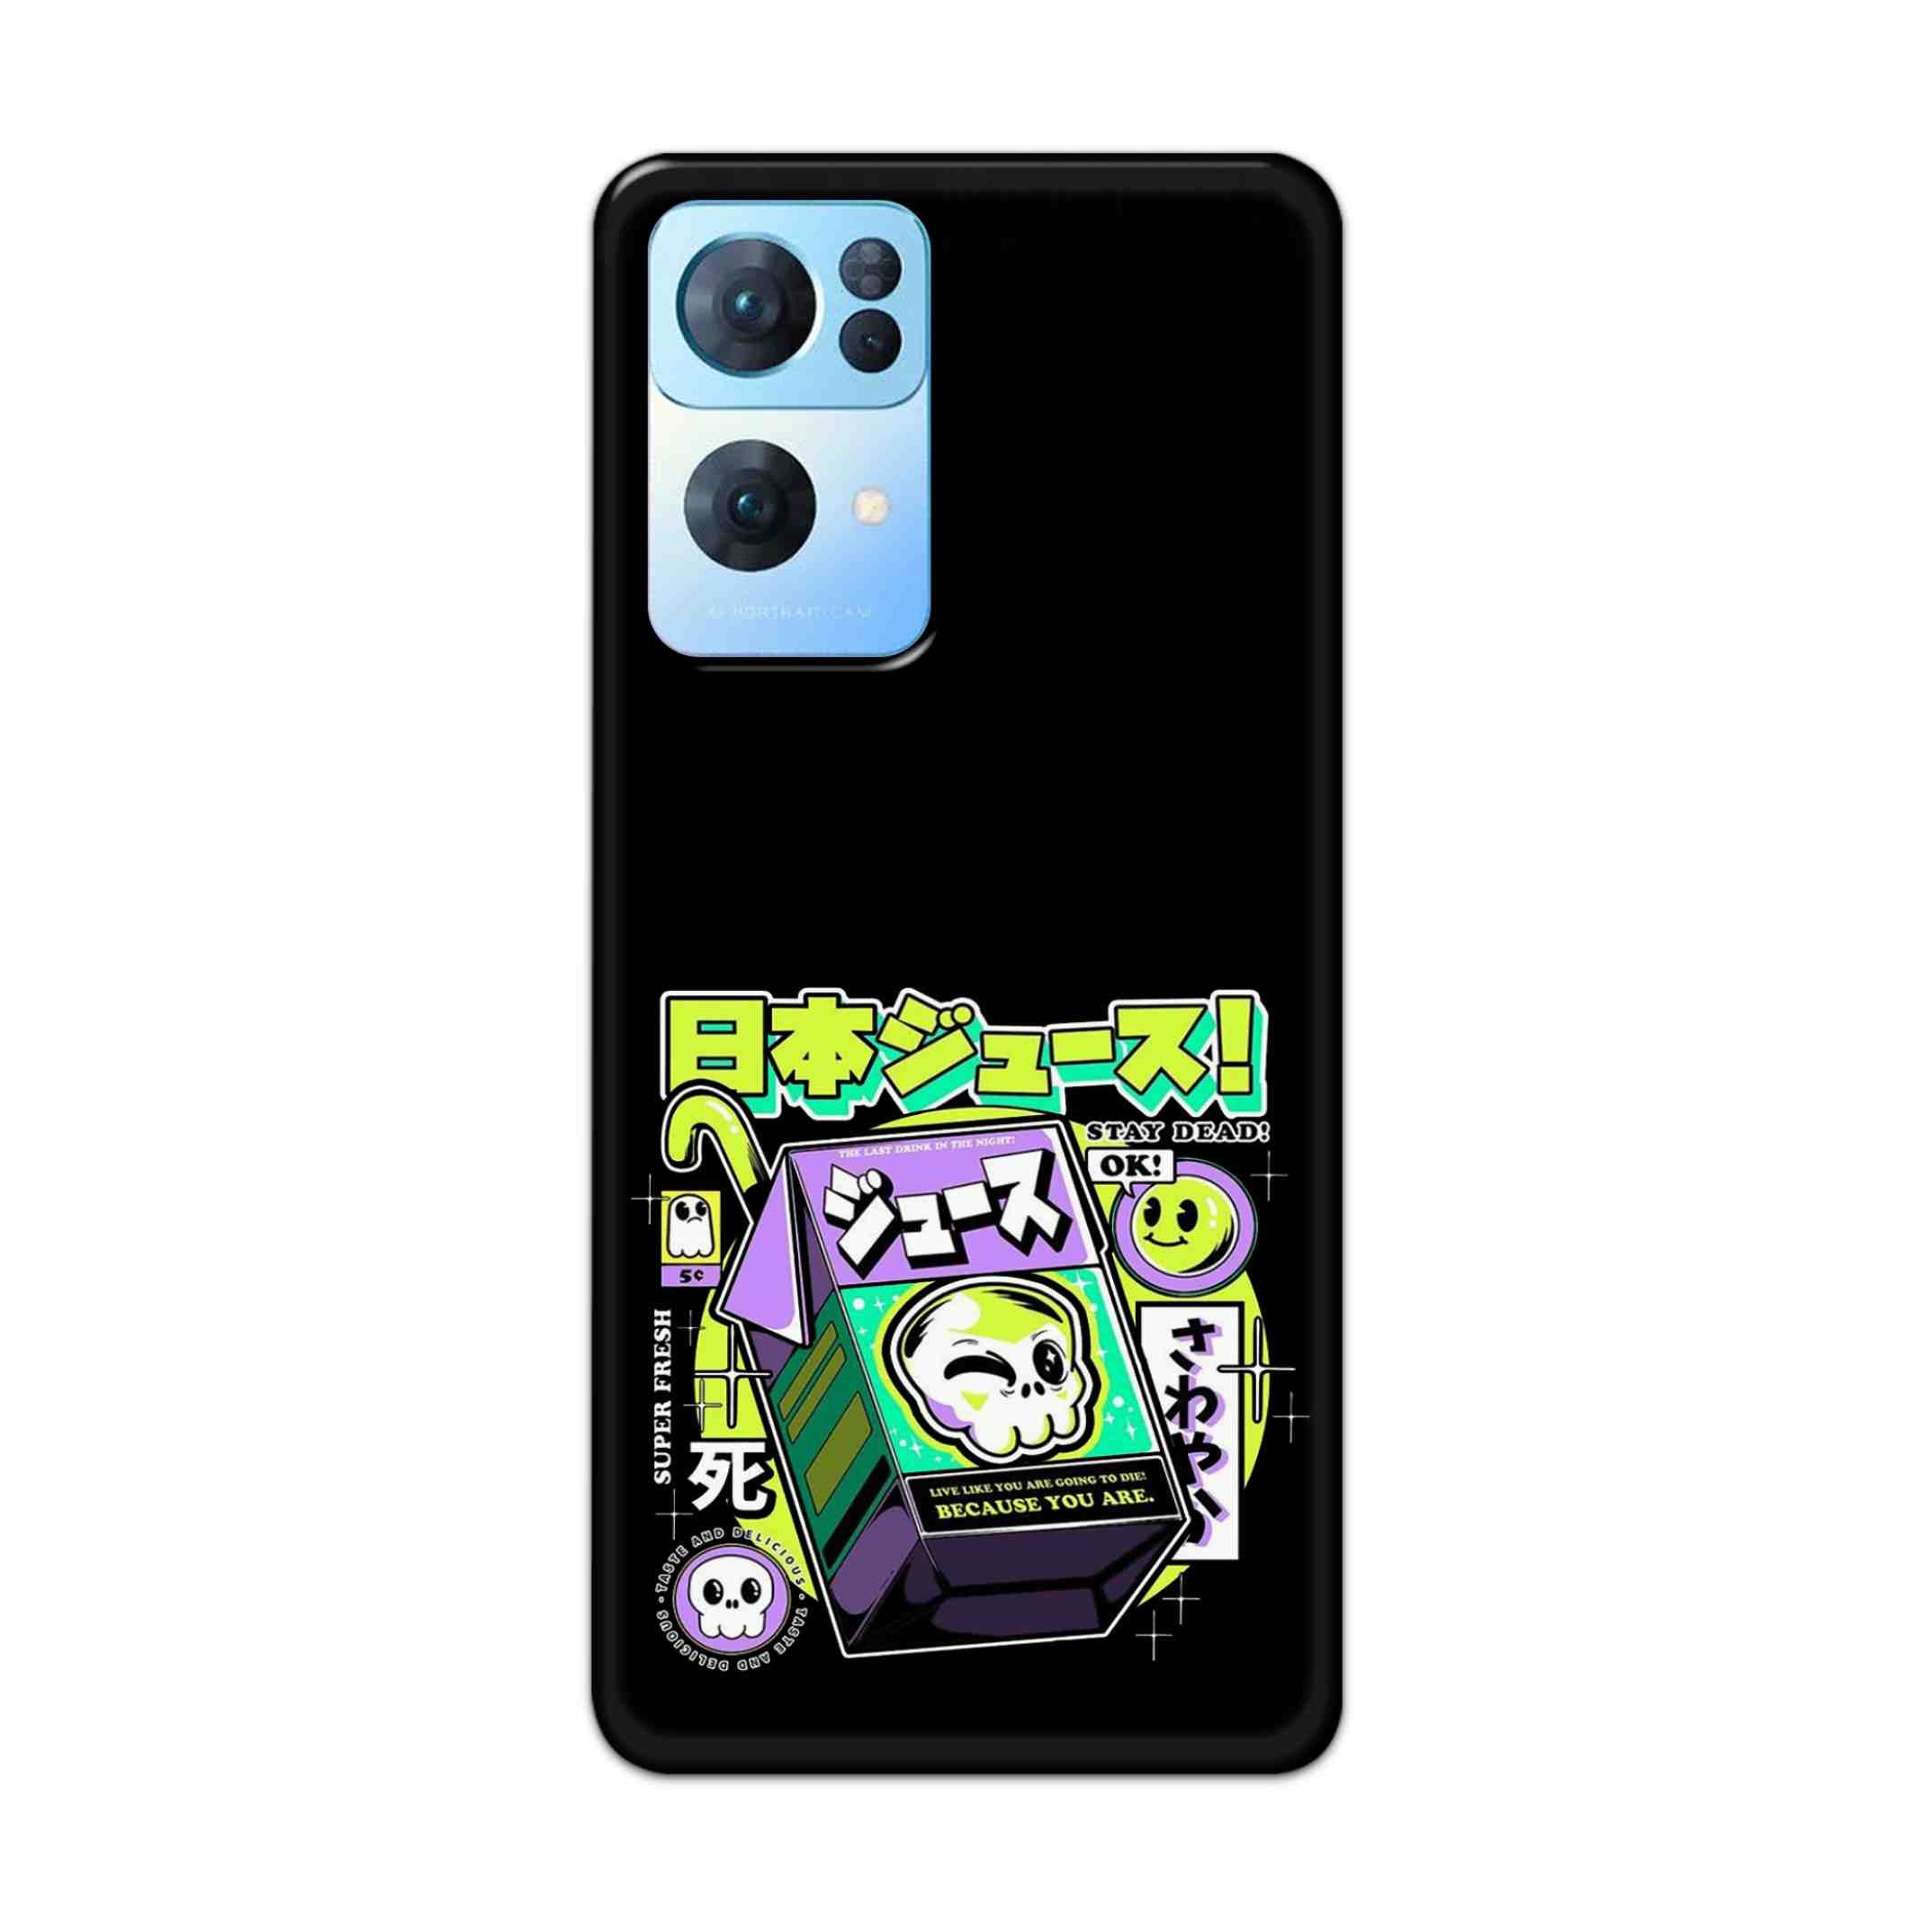 Buy Because You Are Hard Back Mobile Phone Case Cover For Oppo Reno 7 Pro Online